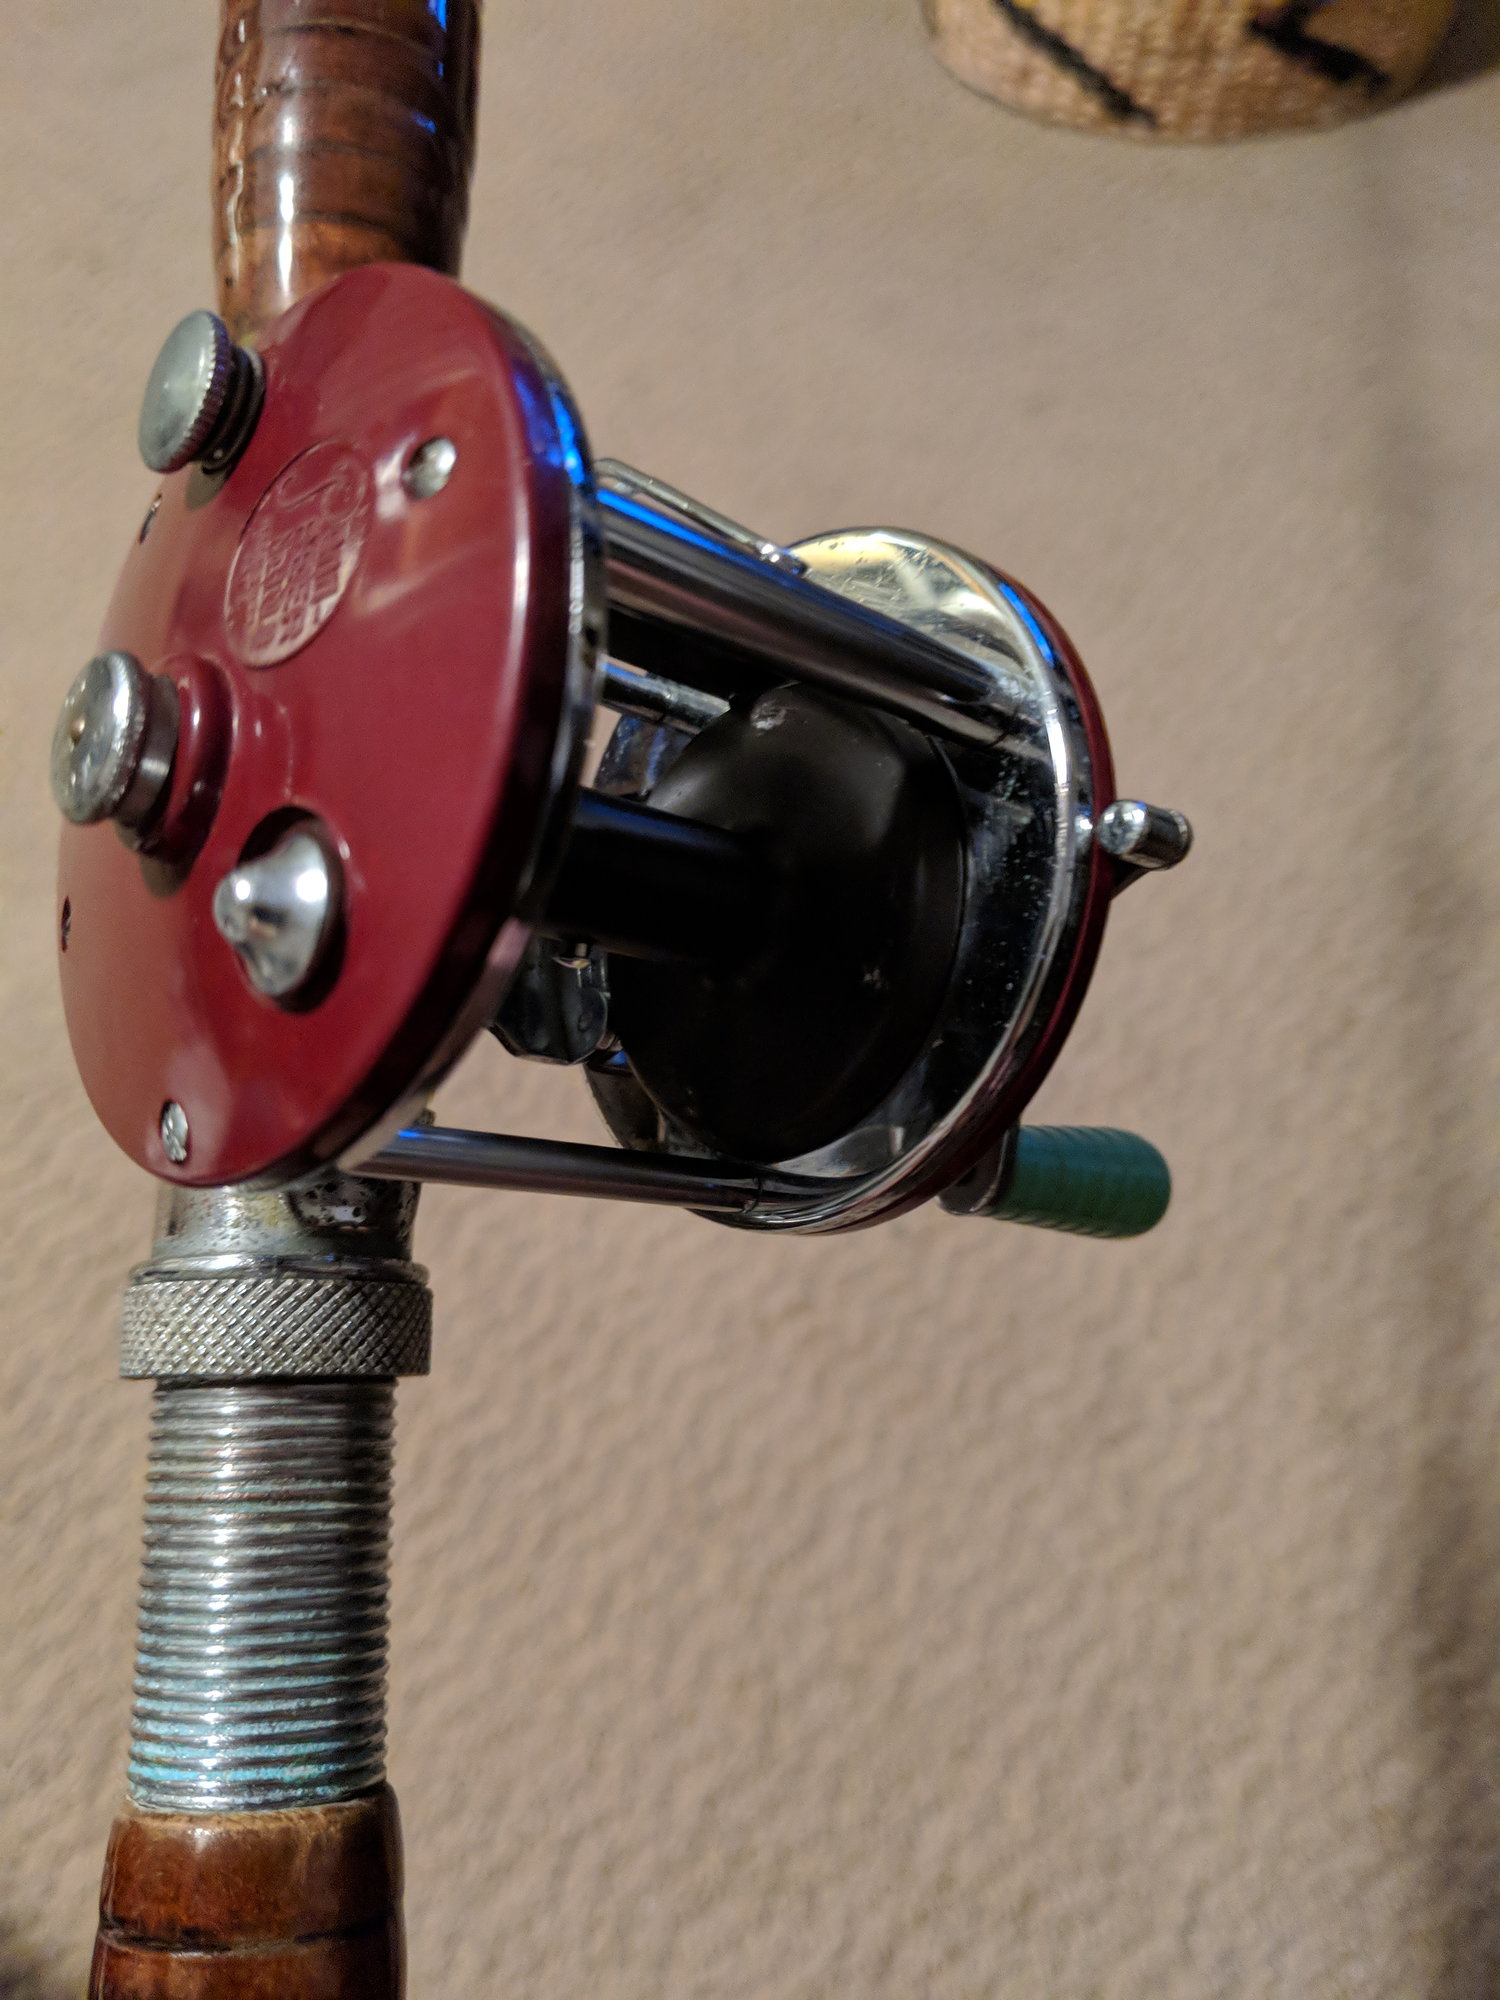 Help identify vintage fishing rod - The Hull Truth - Boating and